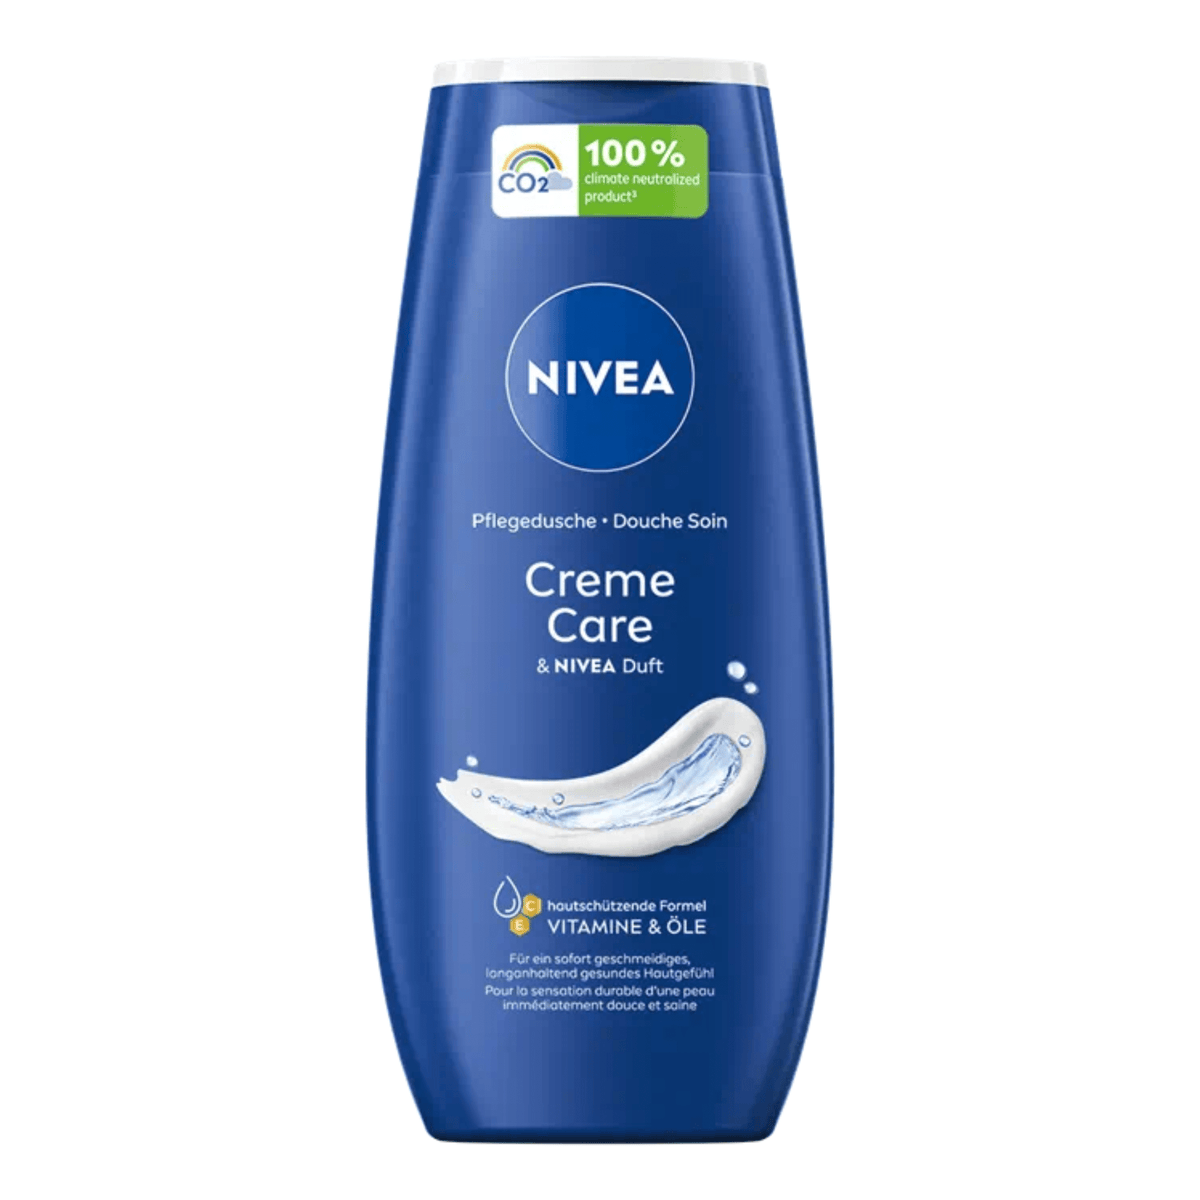 Primary Image of Creme Care Body Wash